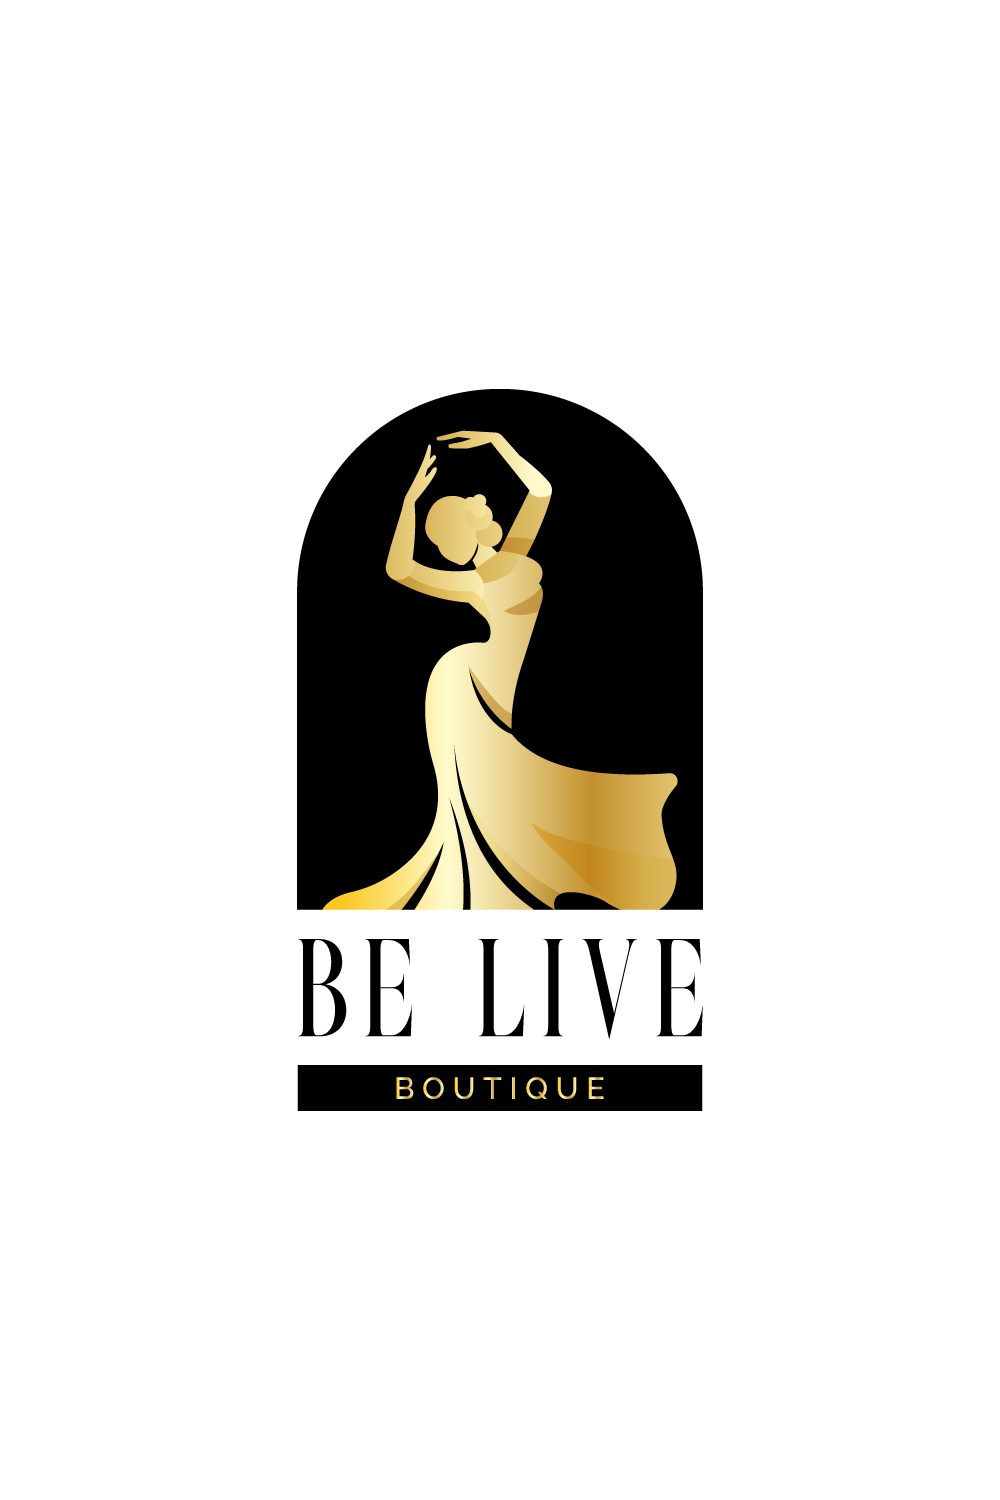 Beautifully Be Live Boutique Logo Templates pinterest preview image.